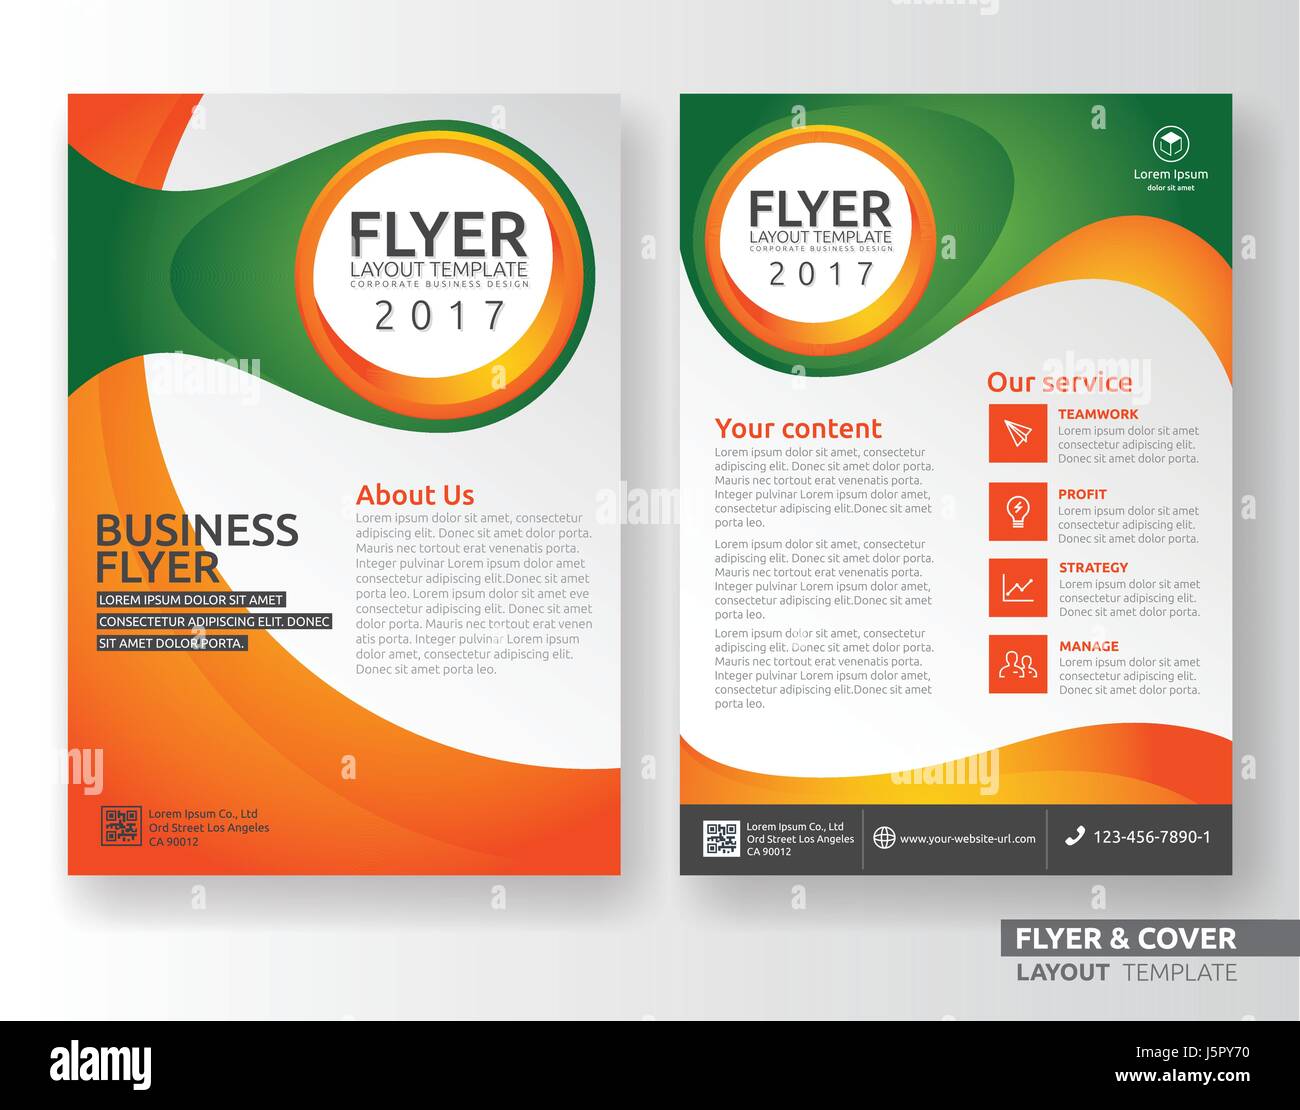 Multipurpose corporate business flyer layout design. Suitable for